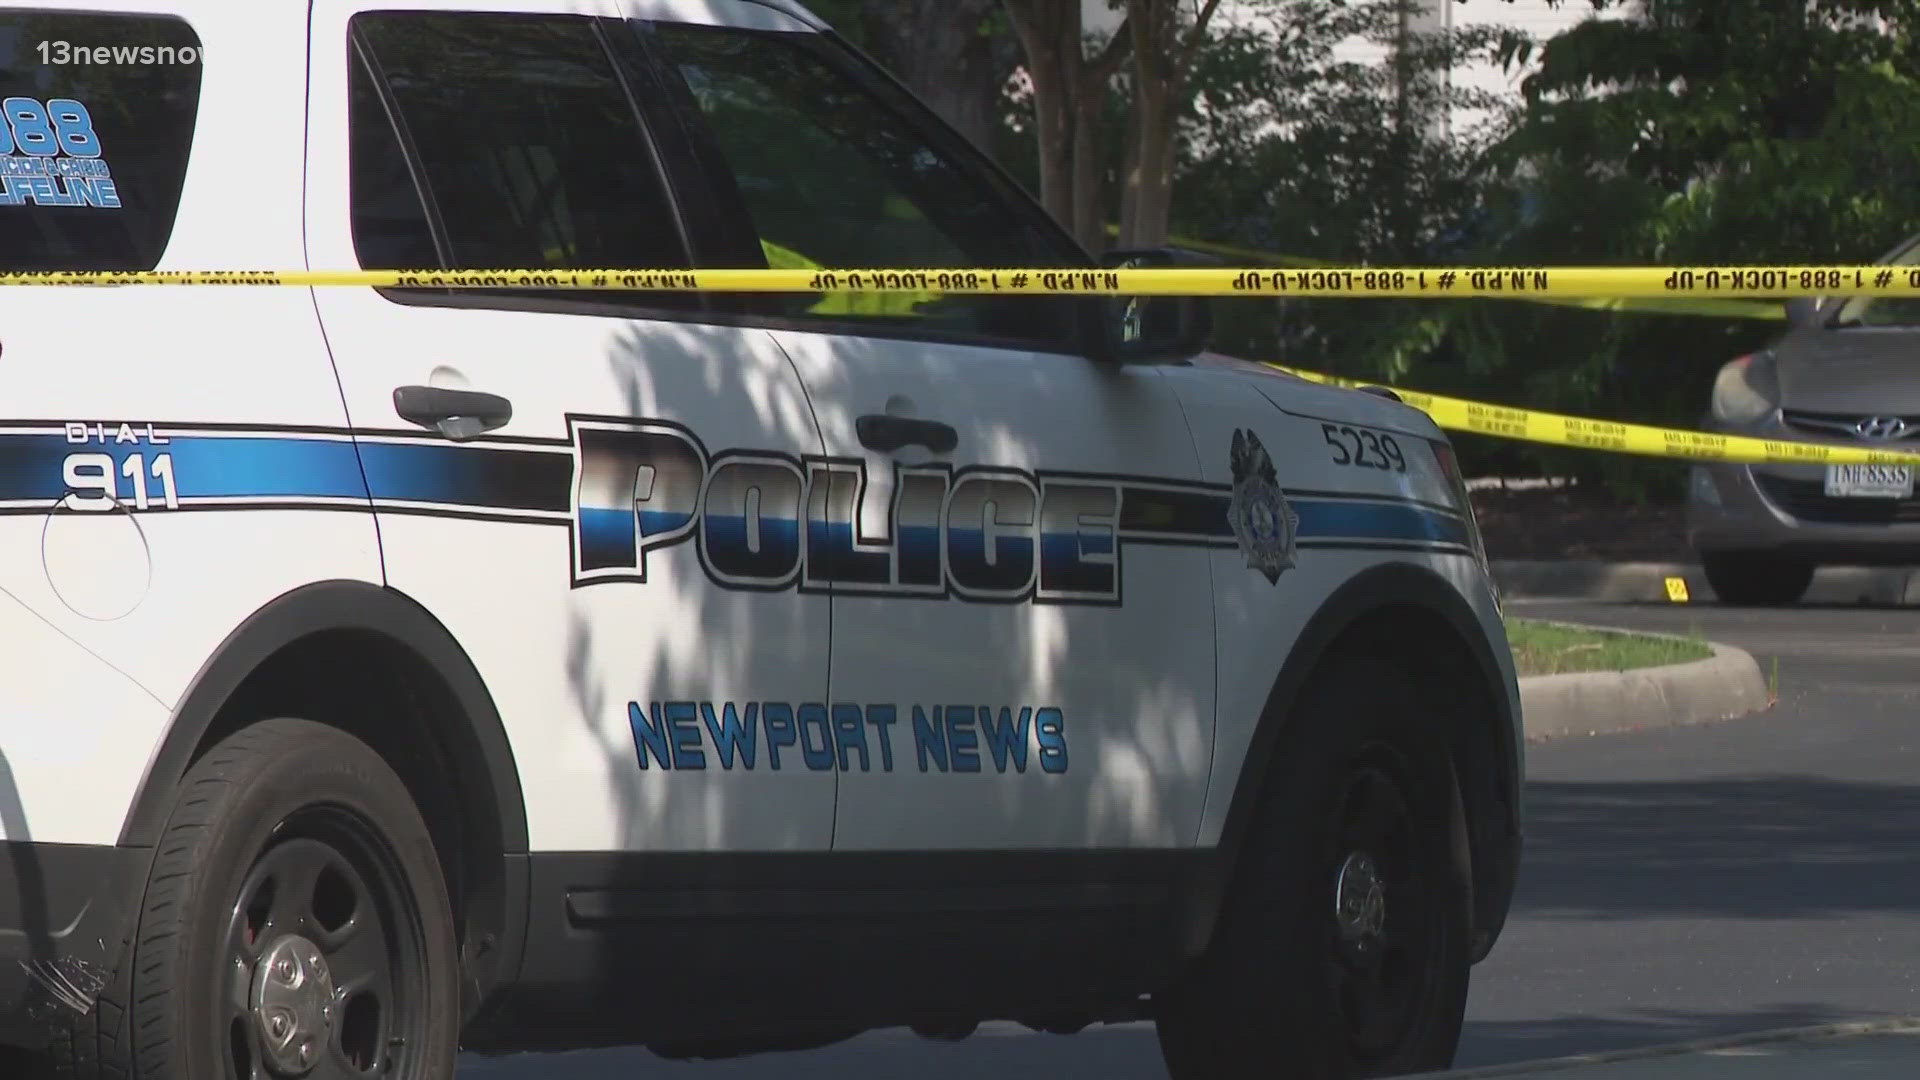 An investigation is underway in Newport News after police officers shot and killed a man following an armed bank robbery!